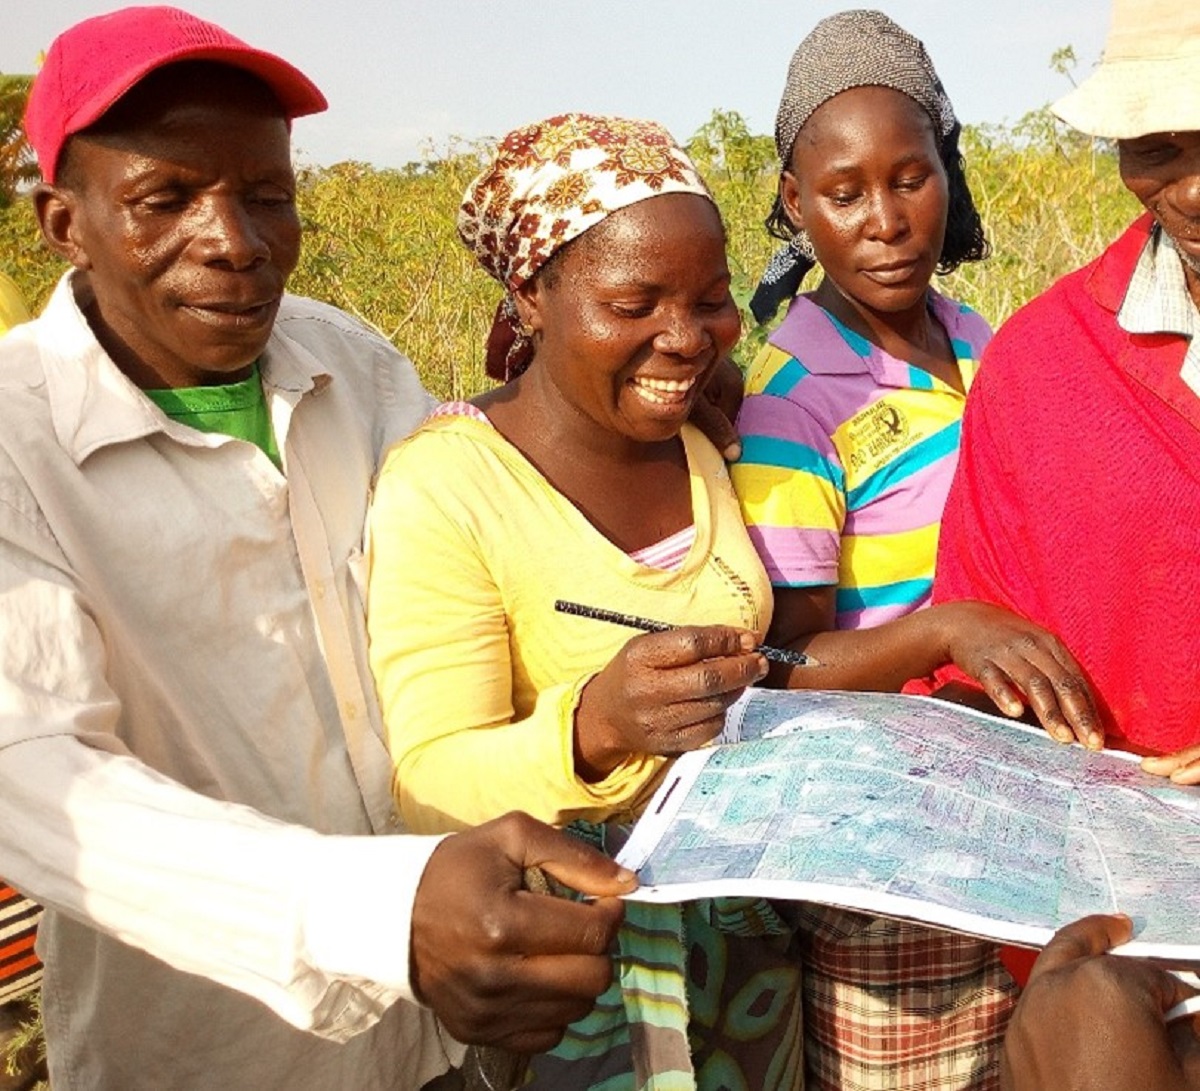 Smallholder farmers in Maragra, Mozambique, engaged in participatory land rights mapping, to identify and secure their plots | Photo provided by Terra Firma